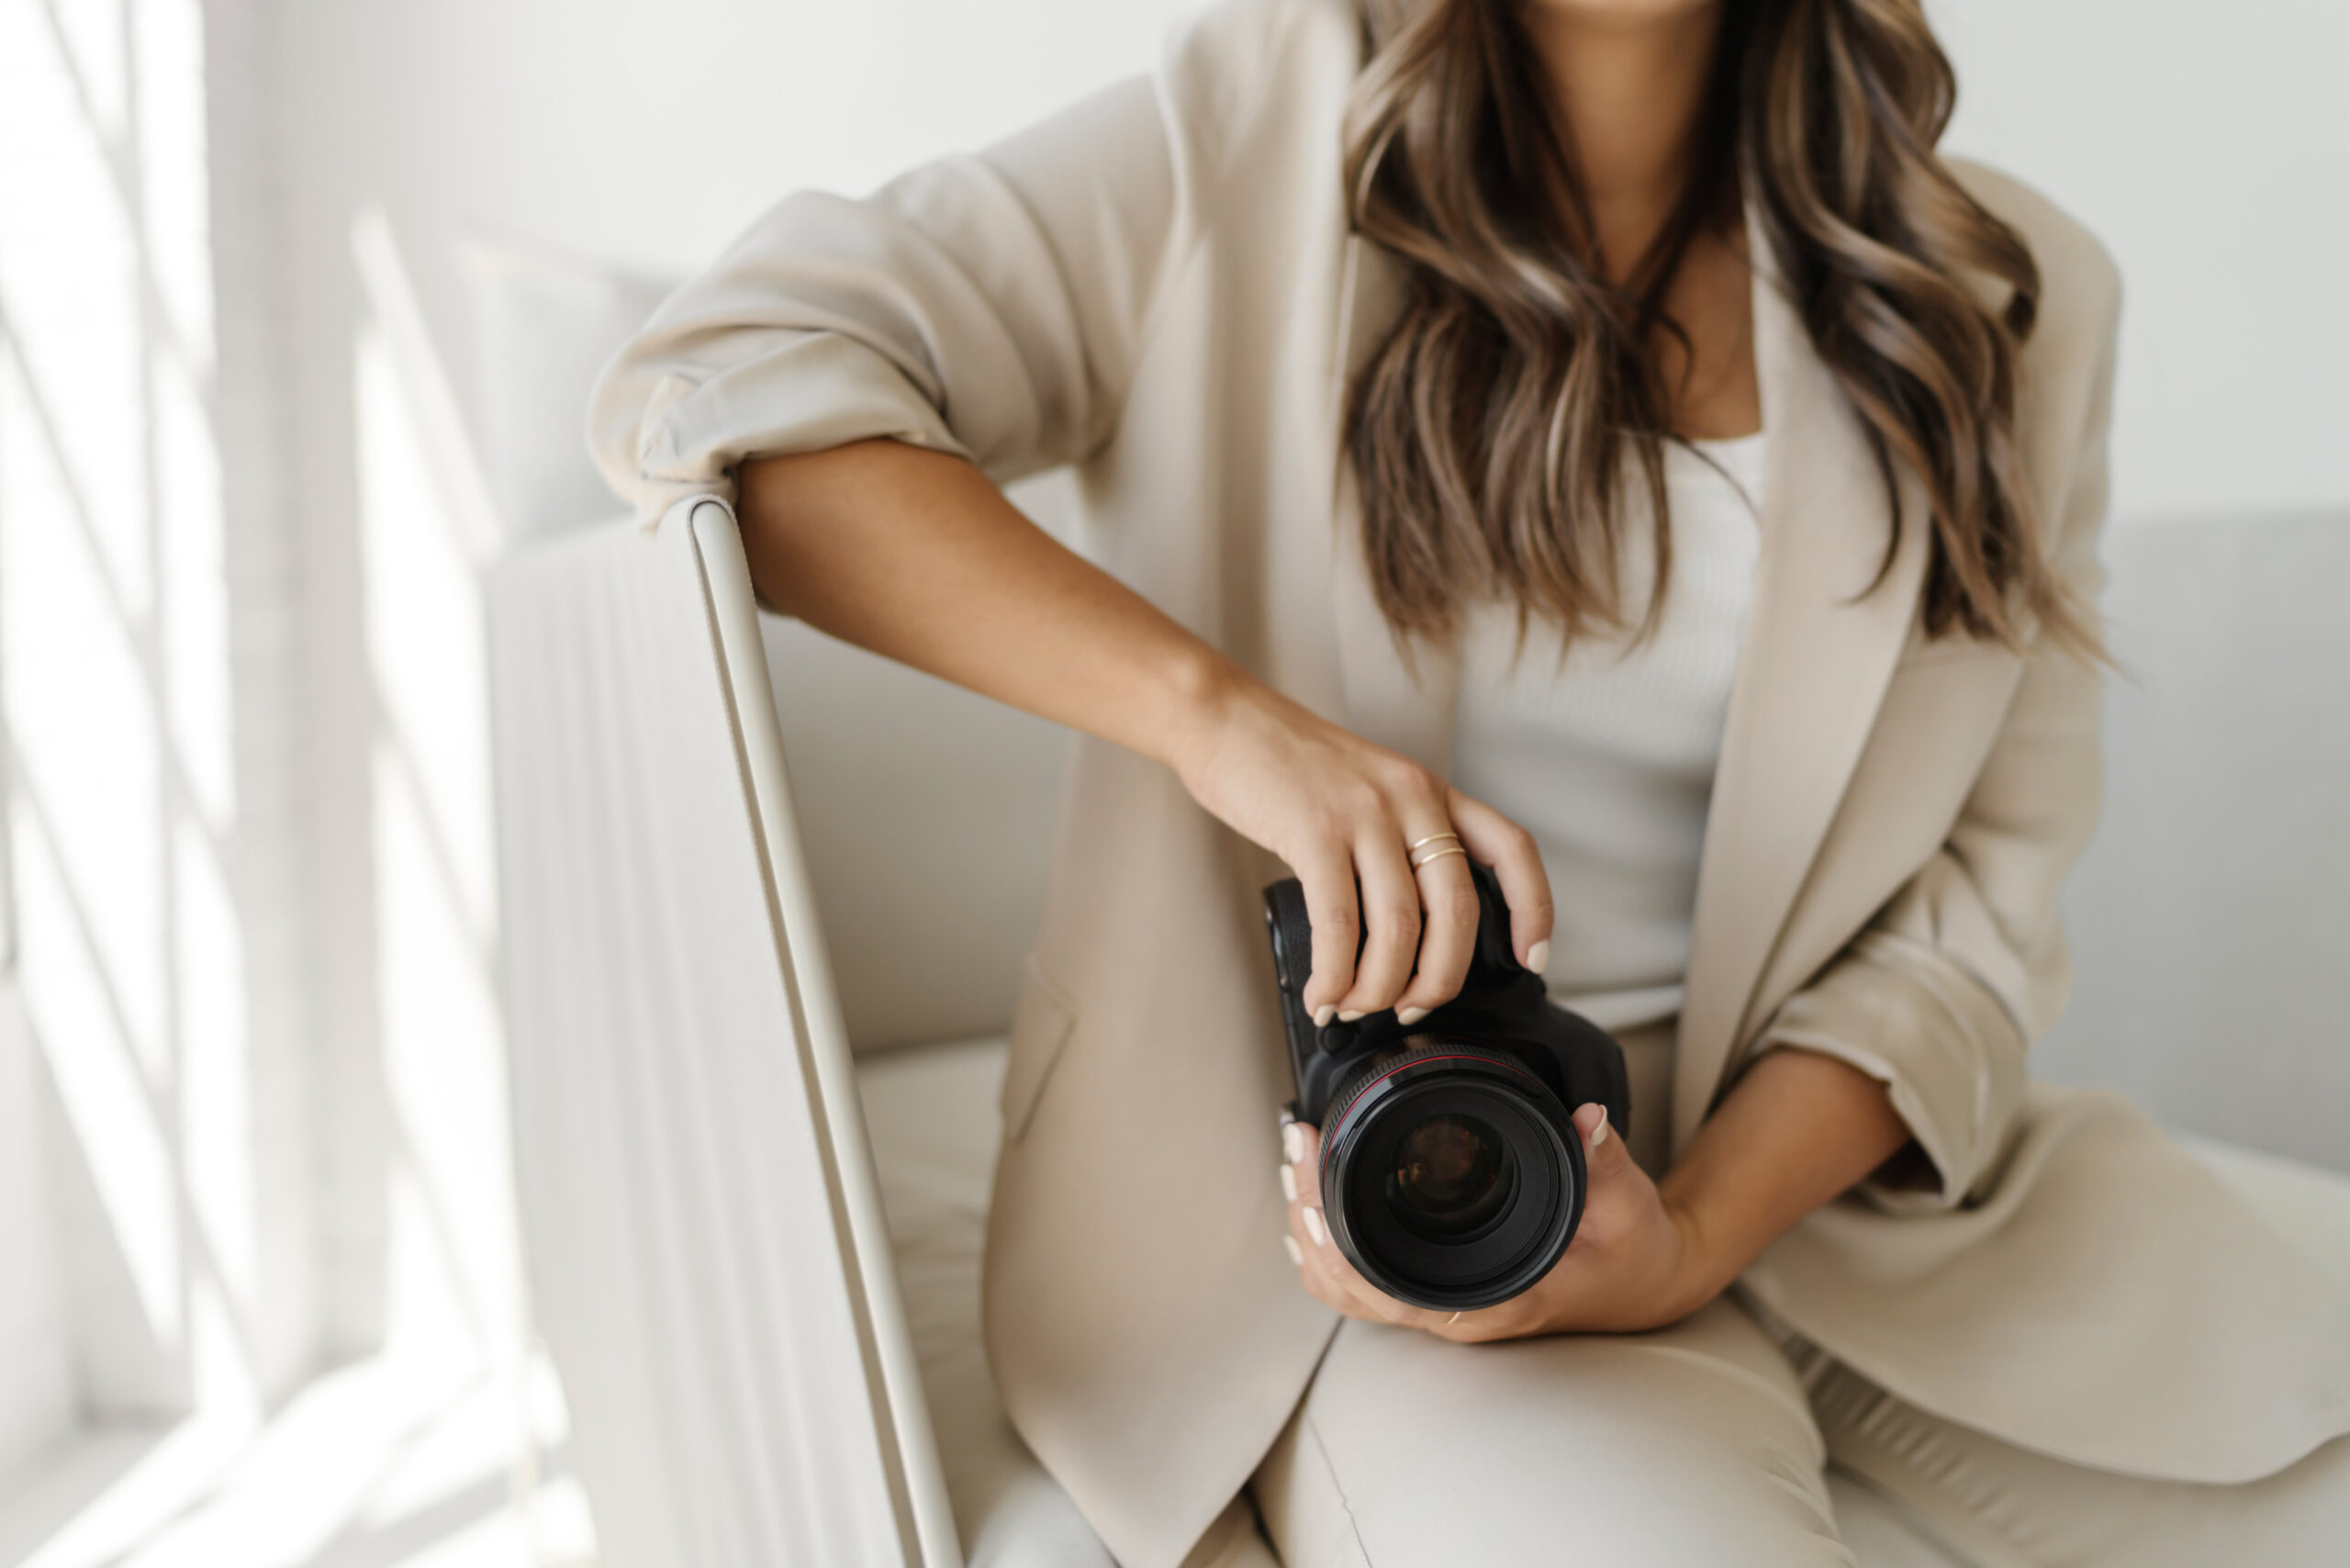 Stock photo of woman photographer holding a camera